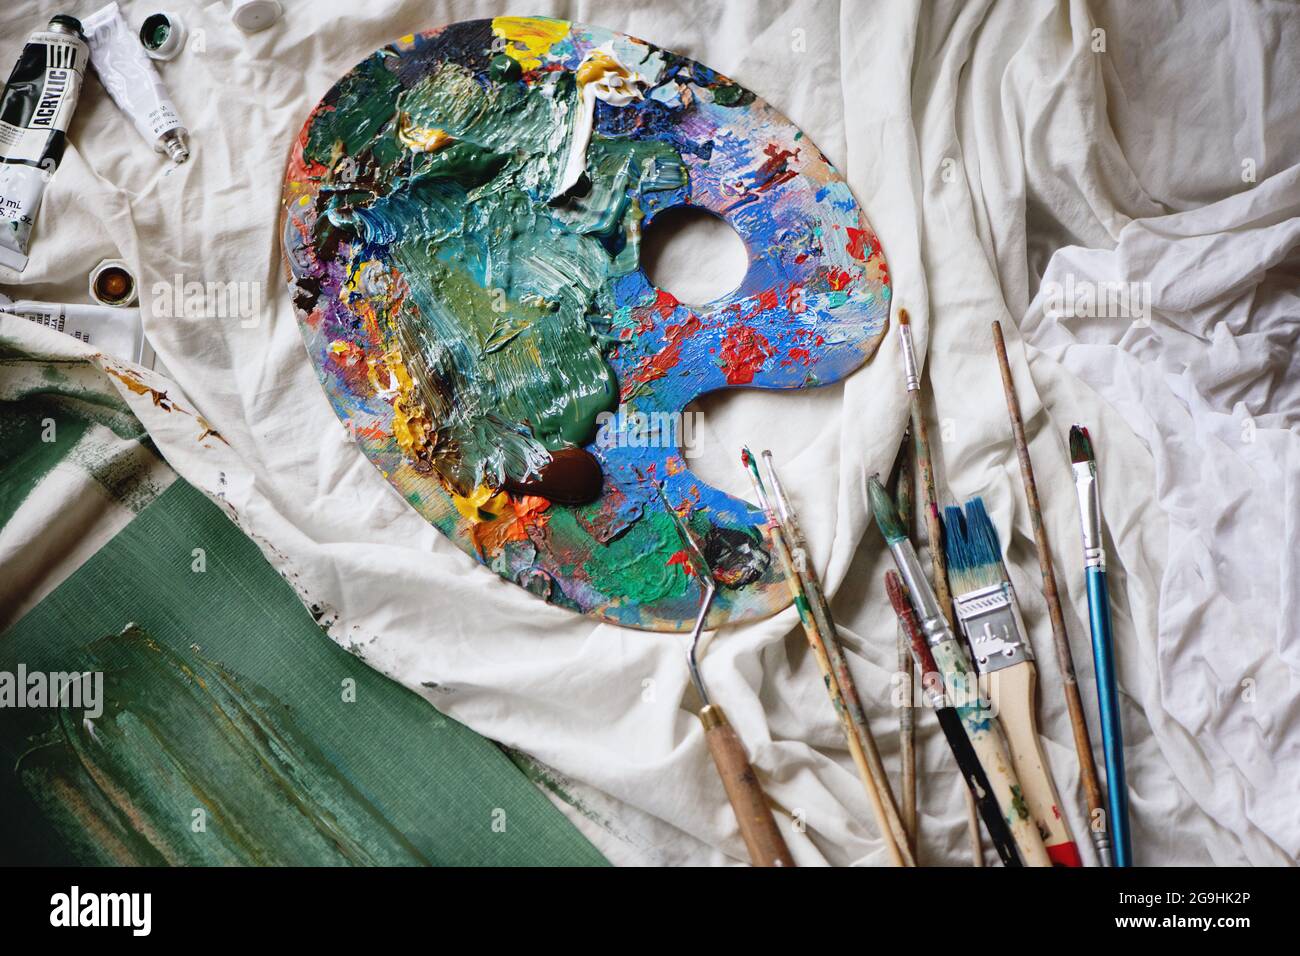 Artist paint brushes and palette on white cloth background. Stock Photo